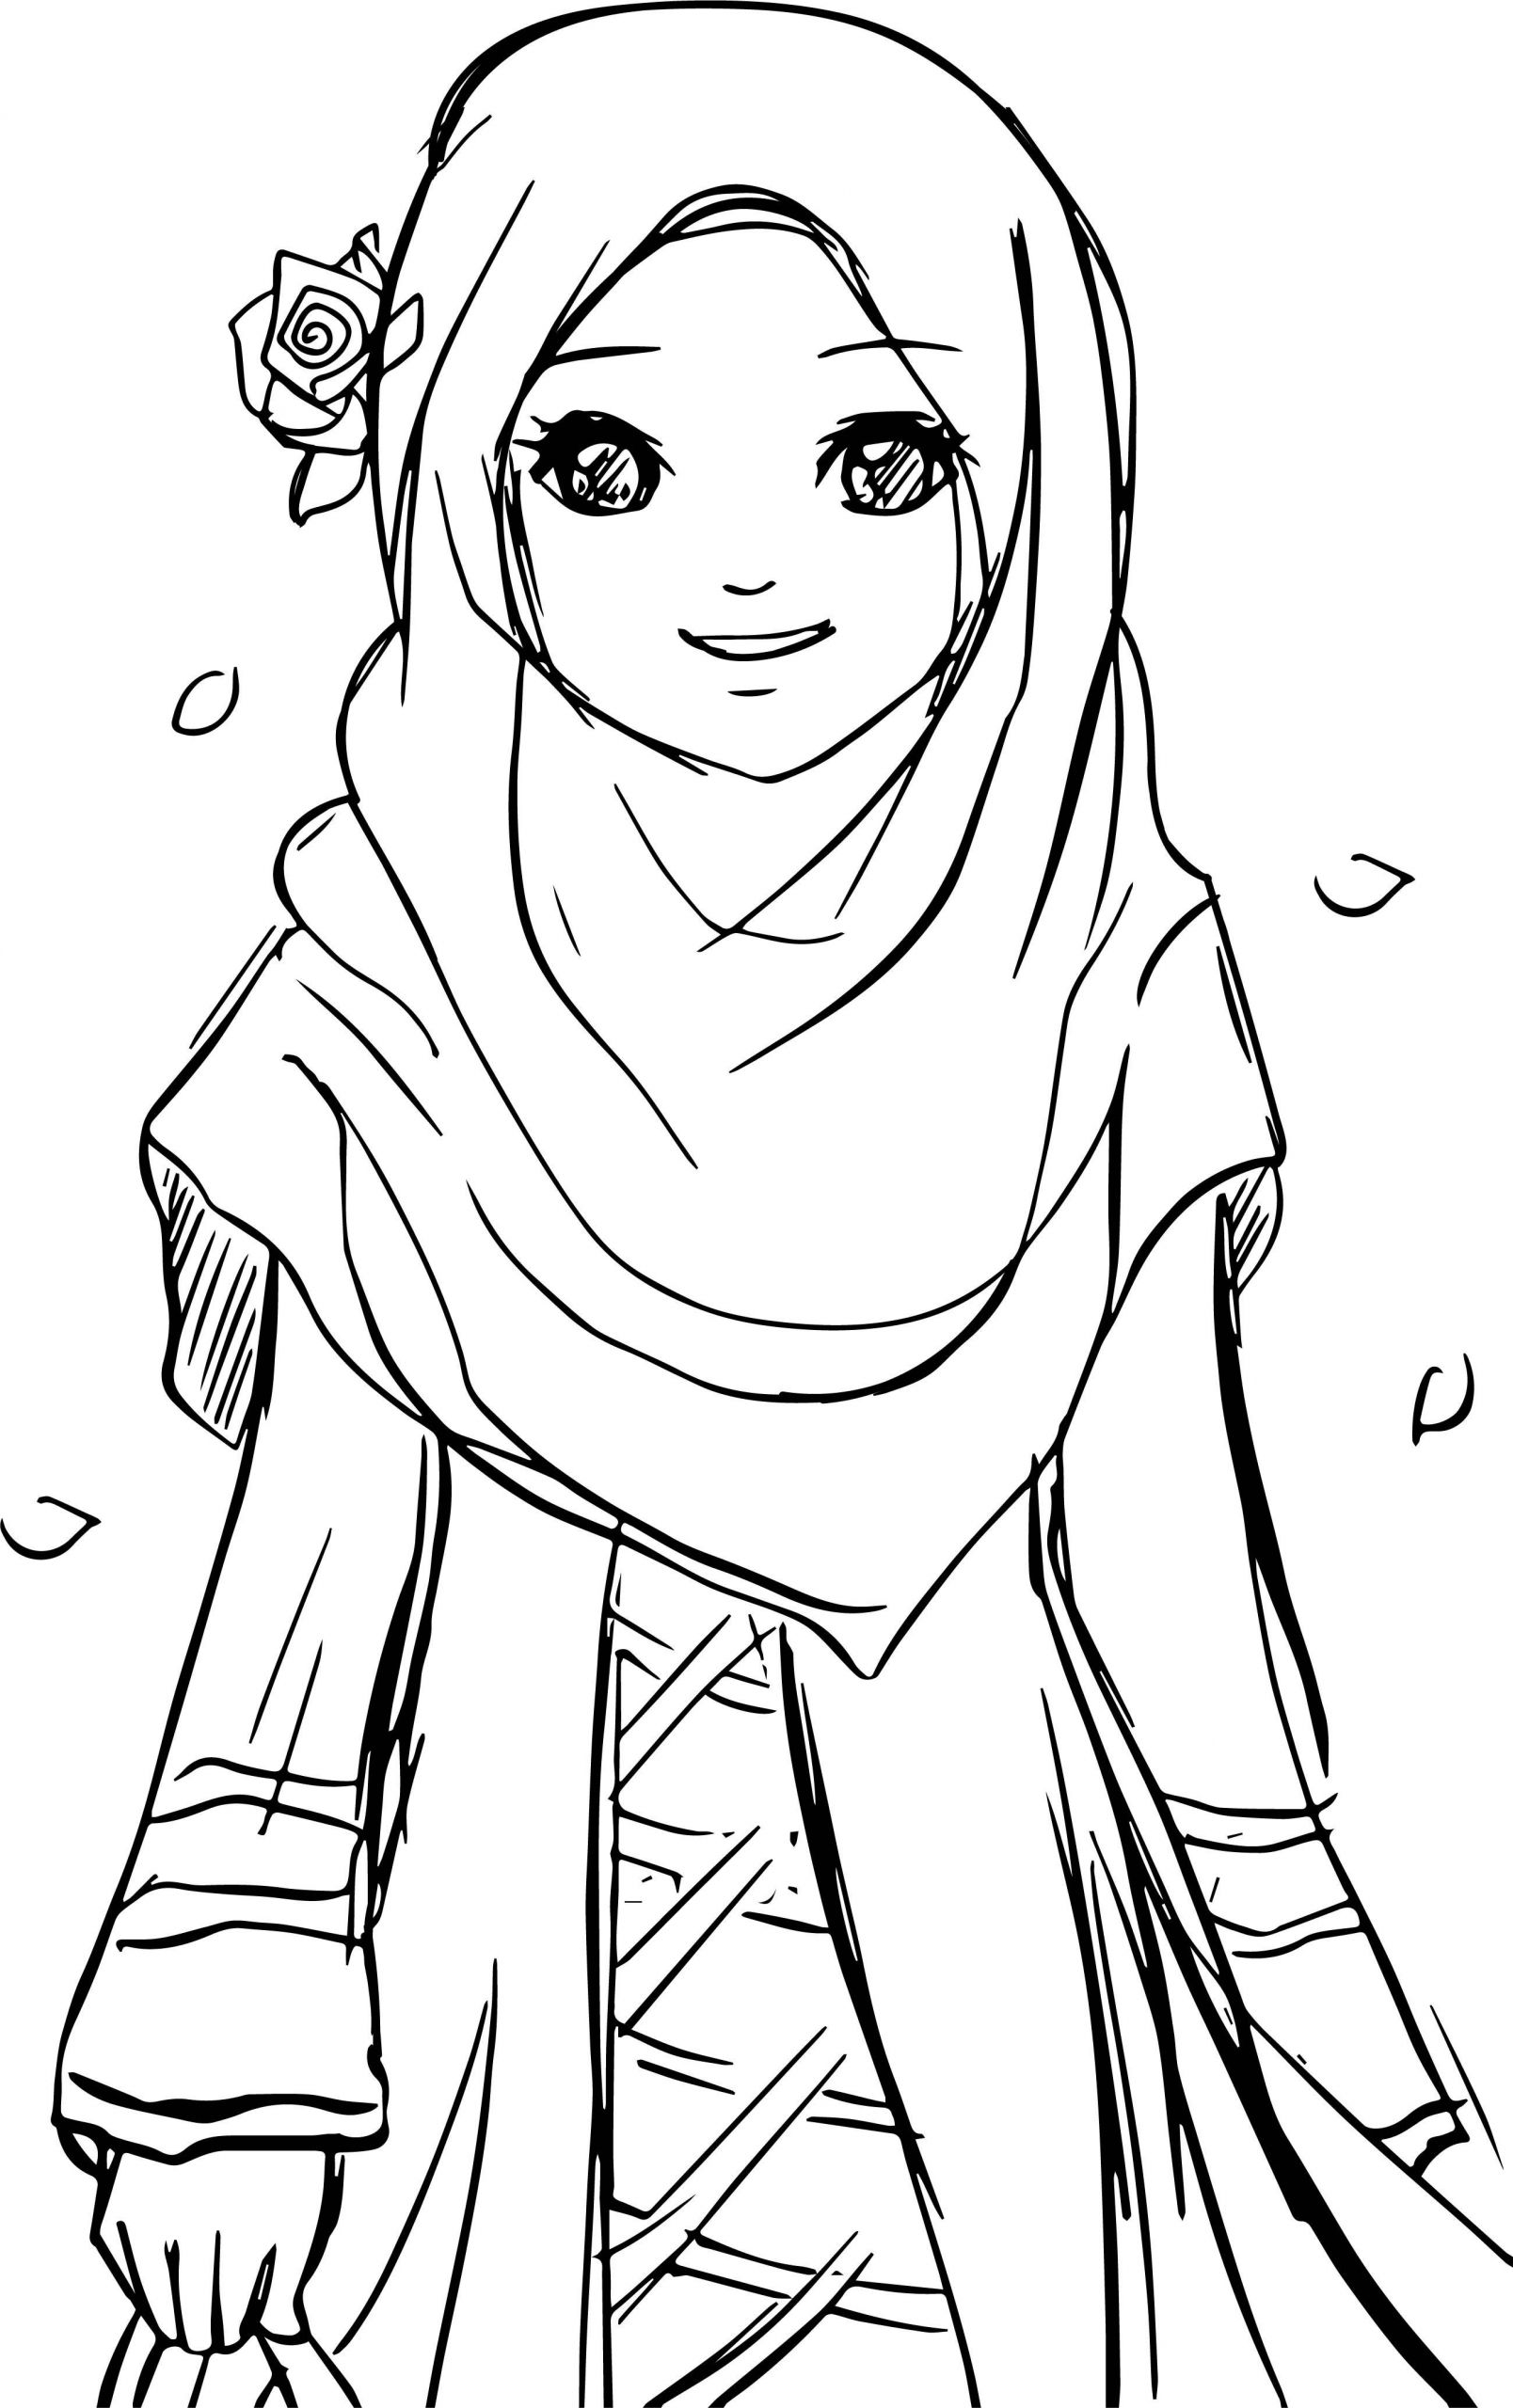 Coloring Book For Girls
 cool Islamic Muslim Wears Hijab Girl Coloring Pages